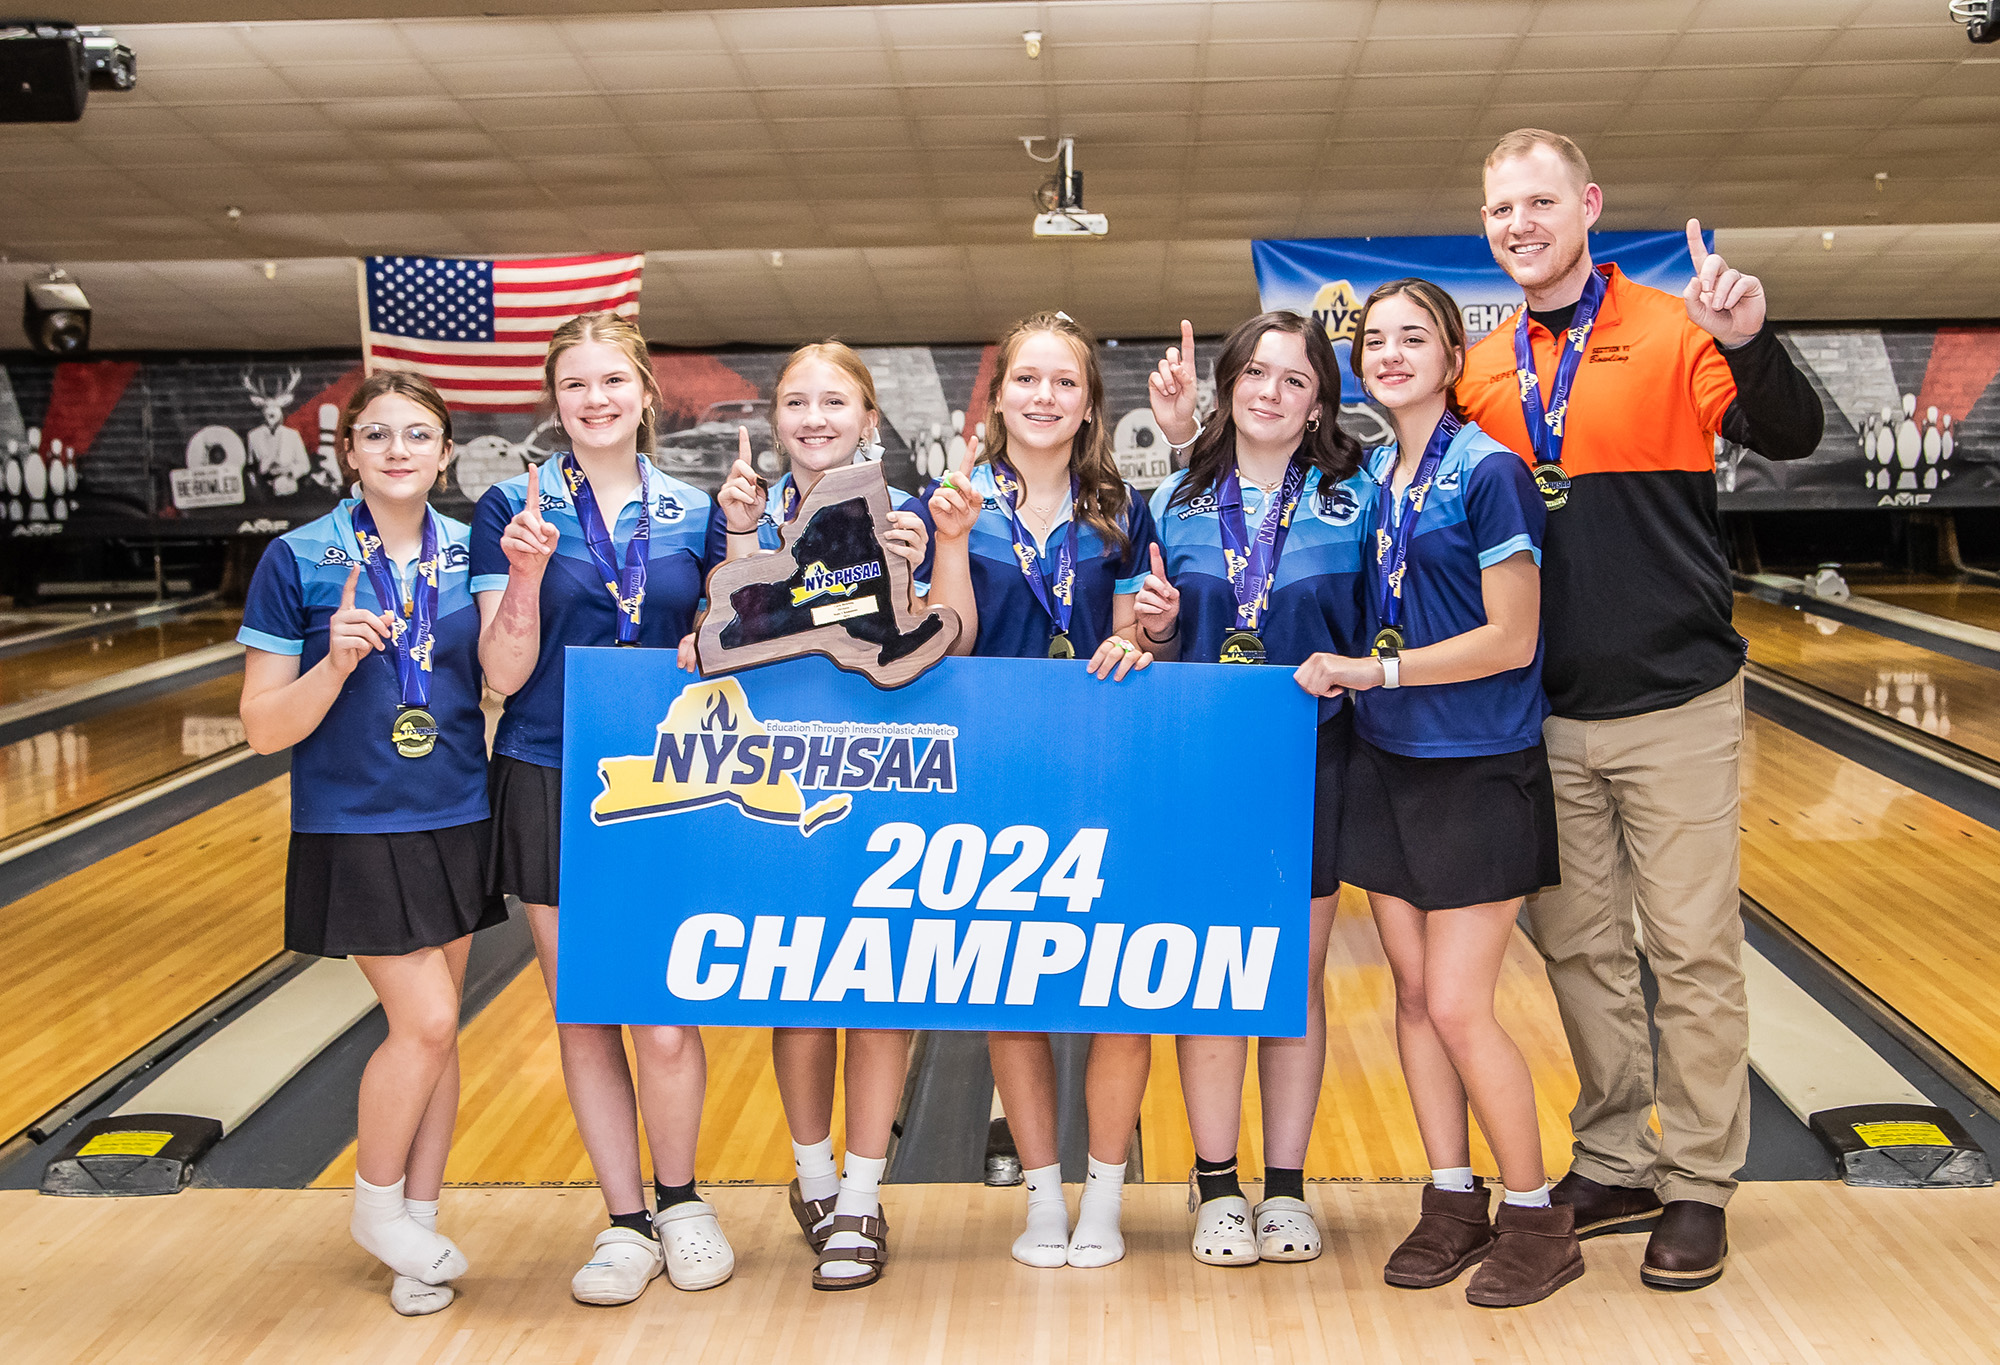 bowling team poses with 2024 sign